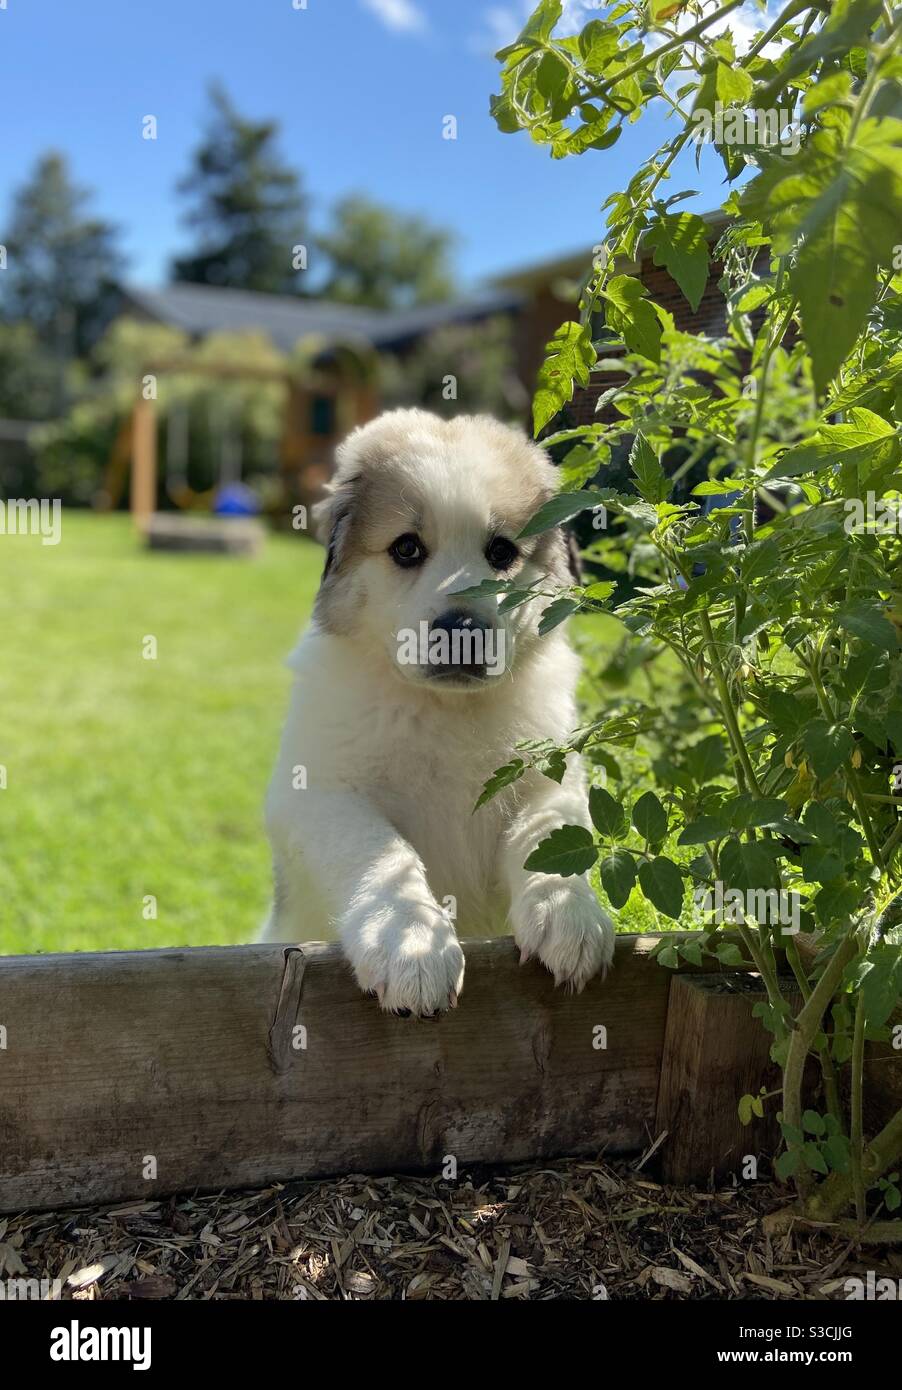 Cute, fluffy Great Pyrenees puppy hiding behind in tomato plant in the garden in the backyard on a sunny day Stock Photo